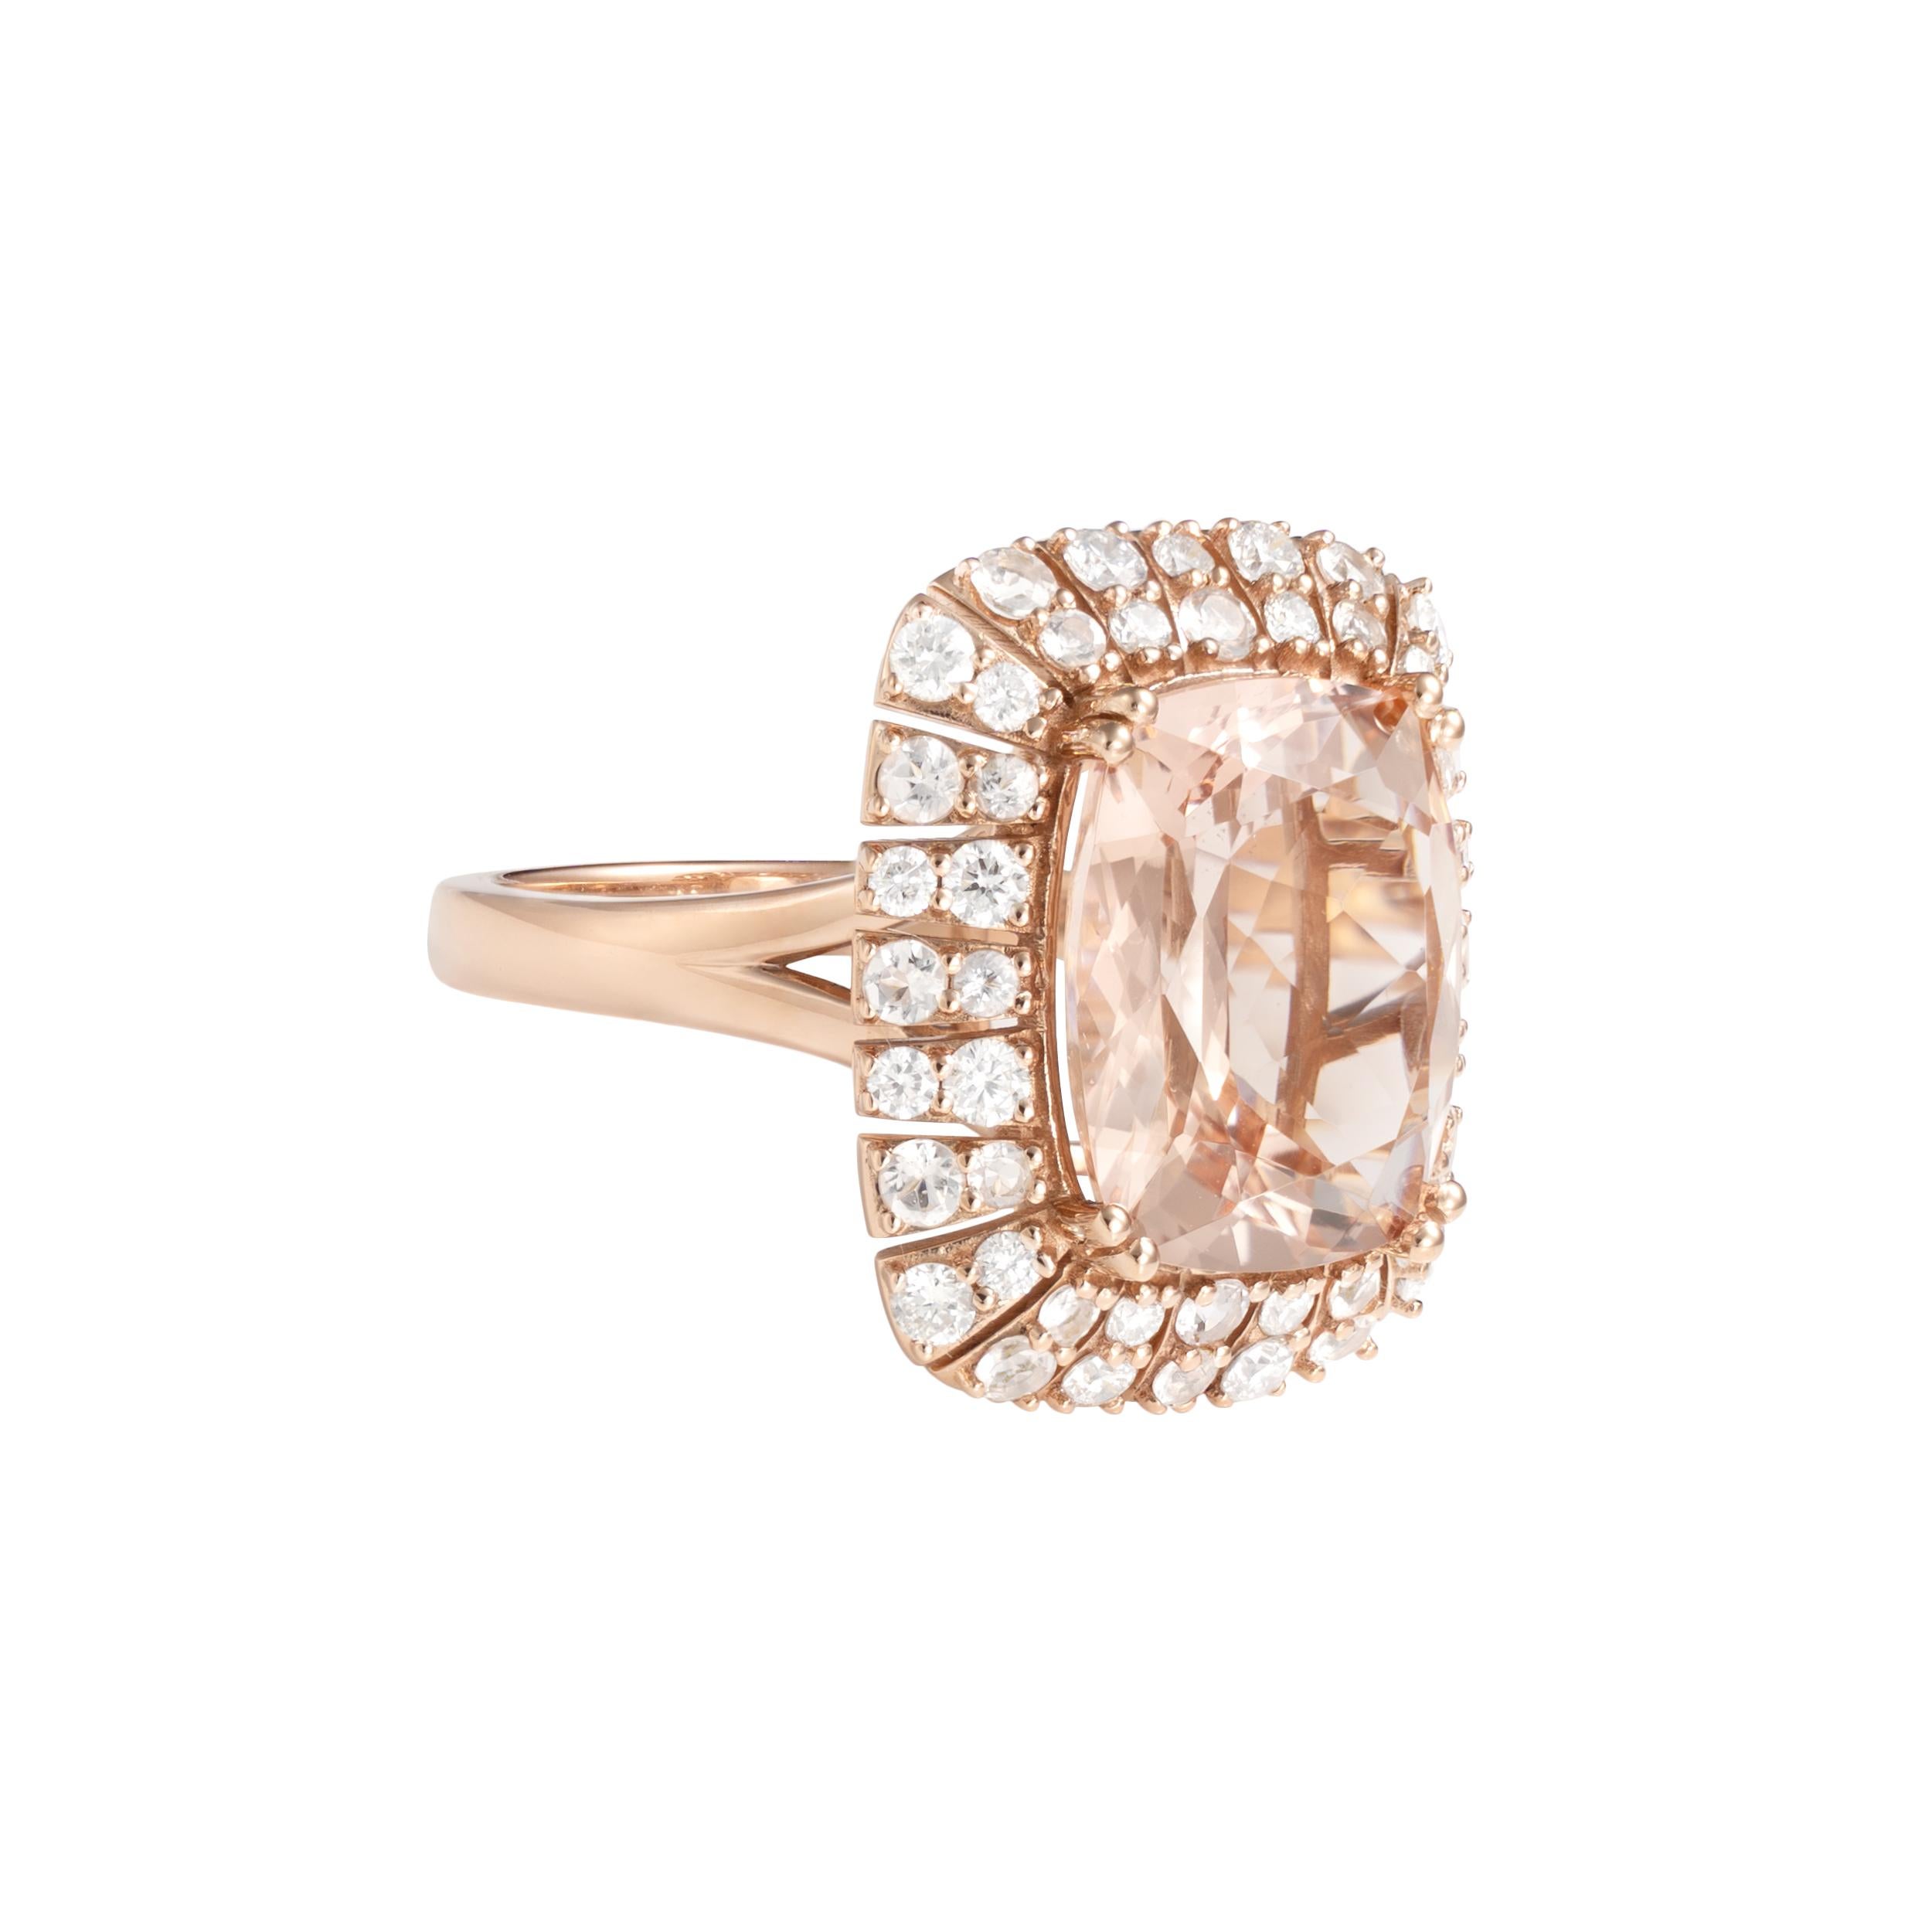 This collection features an array of magnificent morganites! Accented with more morganites and diamonds these rings are made in rose gold and present a classic yet elegant look. 

Classic morganite ring in 18K rose gold with diamonds and morganites.